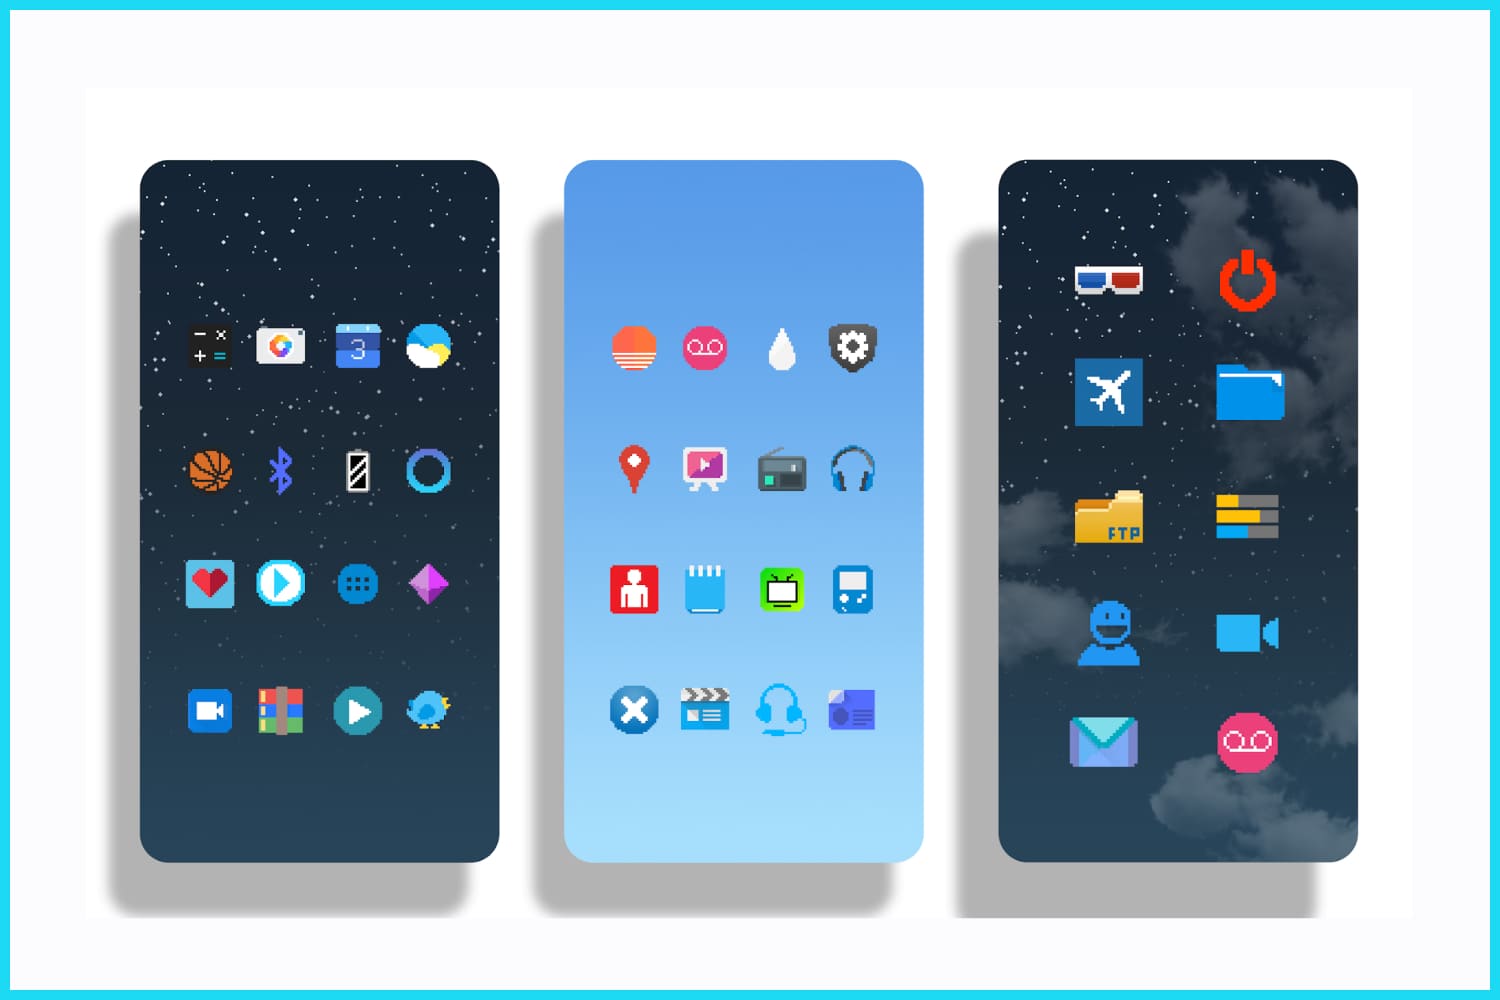 20+ Best Icon Packs for Android to Spice Up Your Designs